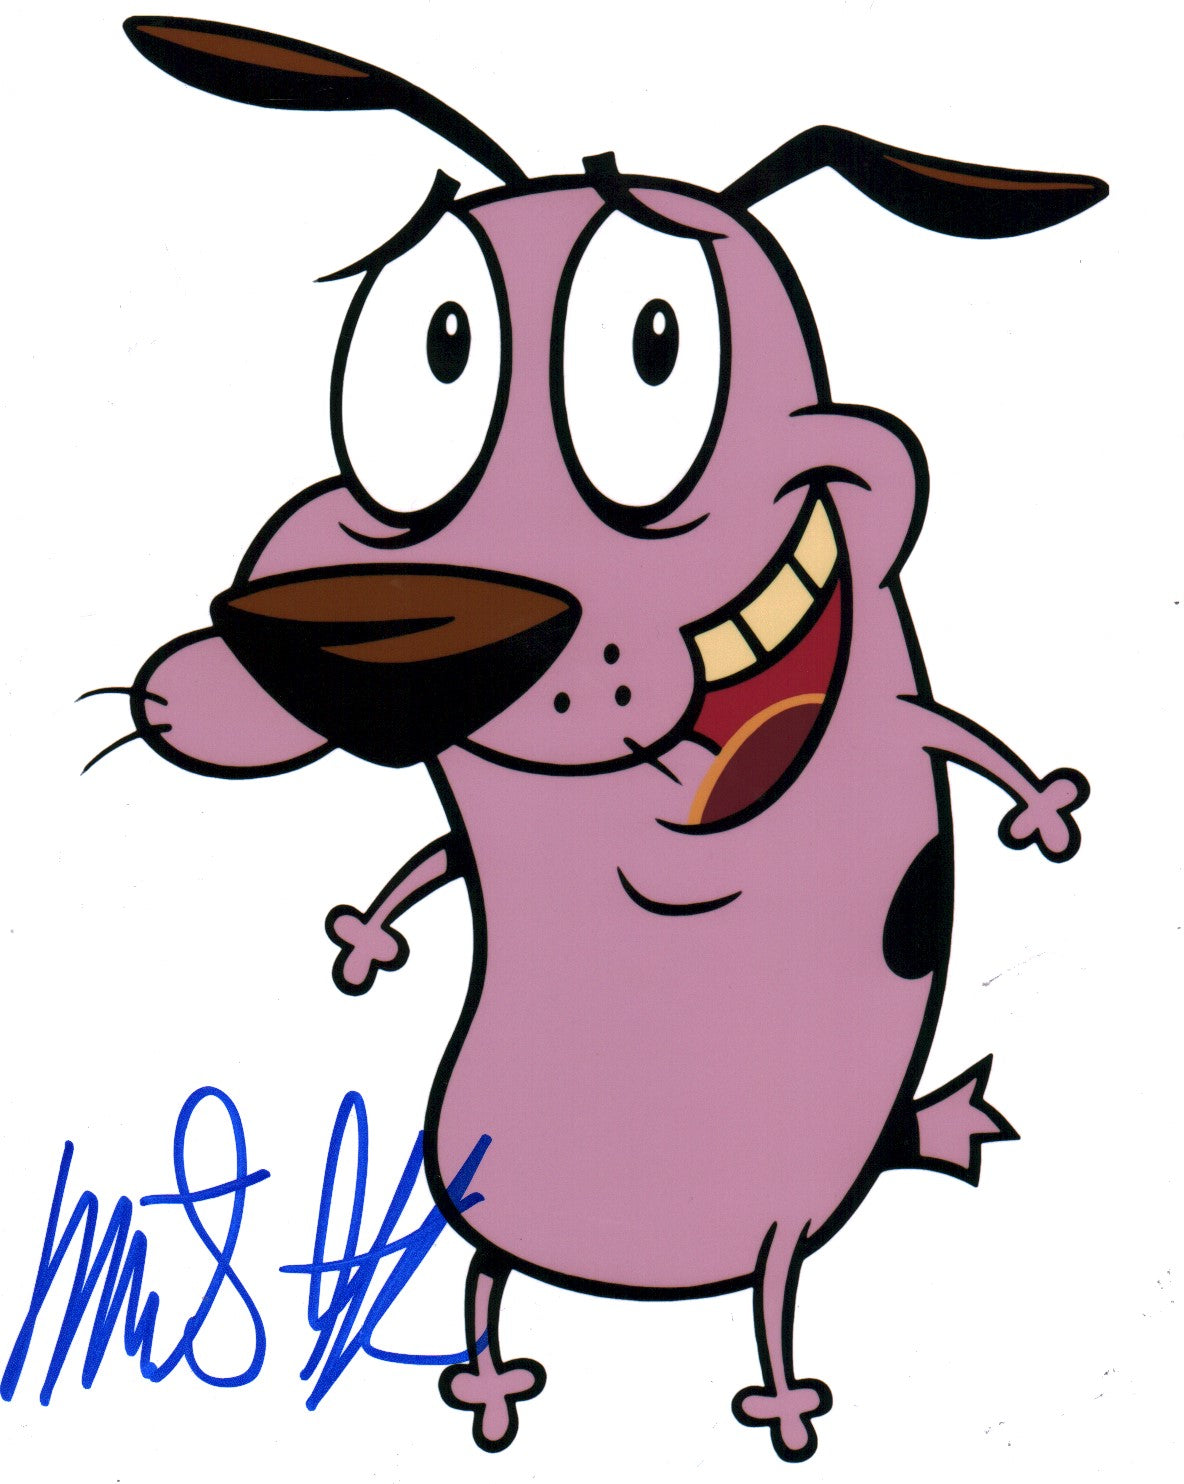 Marty Grabstein Courage the Cowardly Dog 8x10 Signed Photo JSA Certified Autograph GalaxyCon